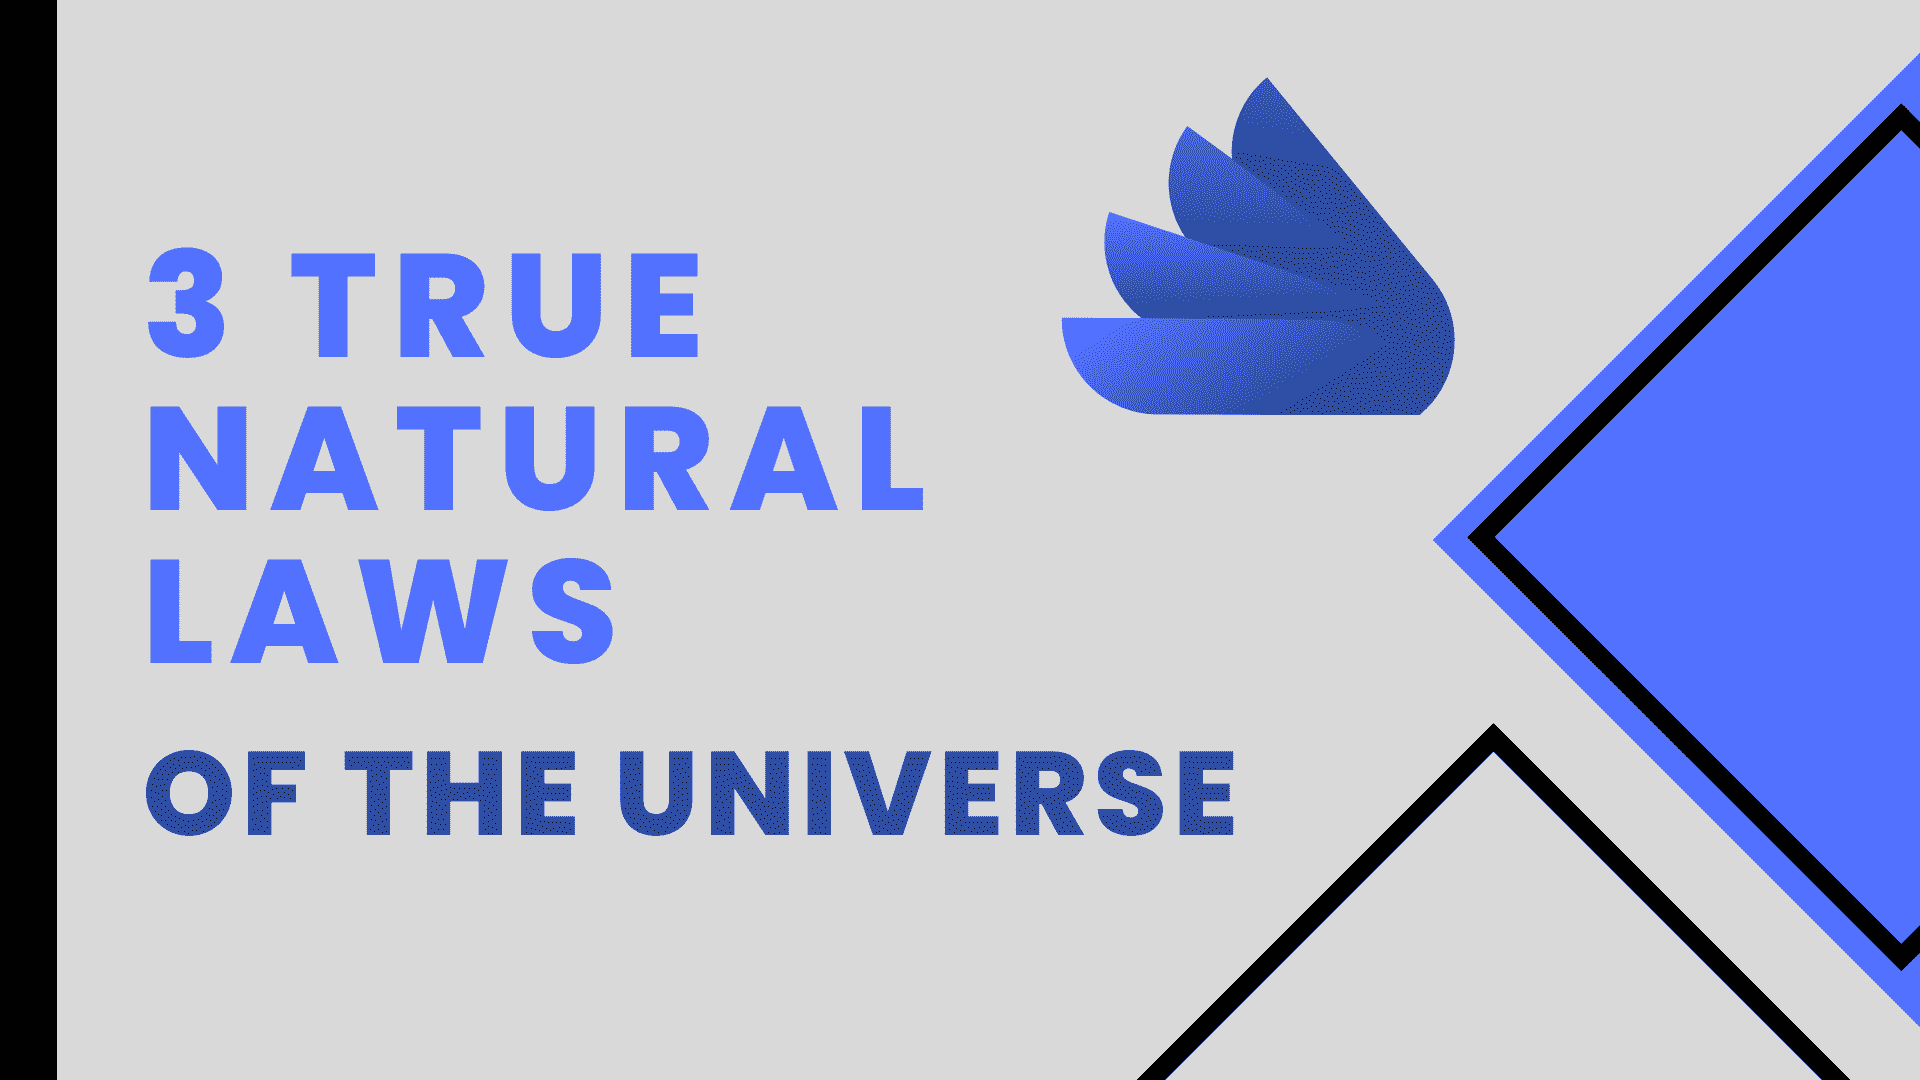 3 True Natural Laws of the Universe